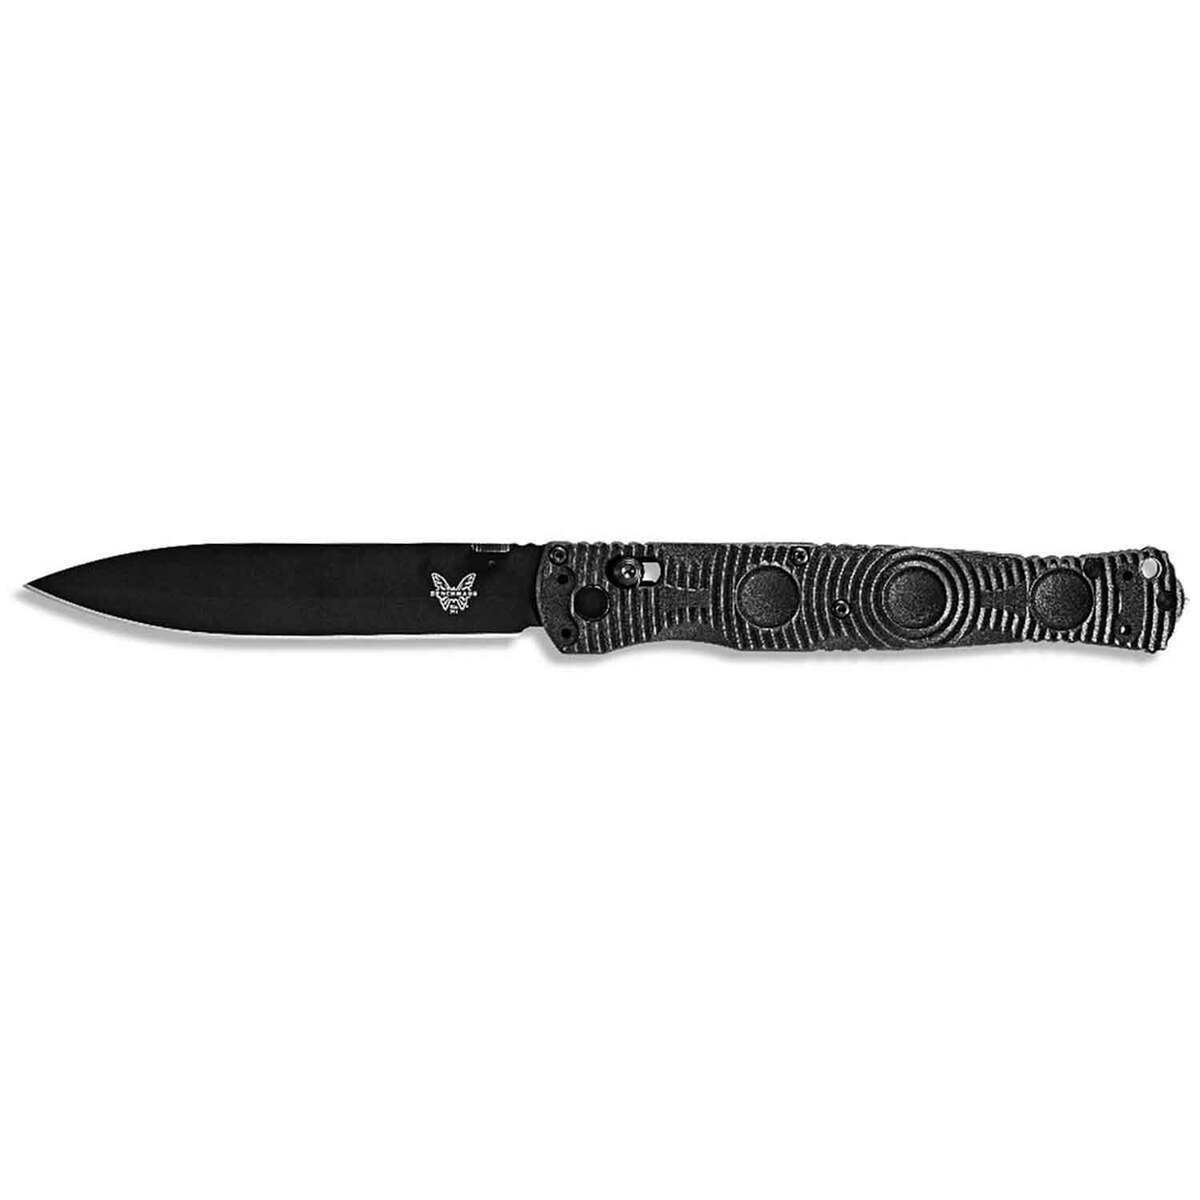 Benchmade 391T SOCP Tactical AXIS Trainer - 4.47 Non-Sharpened